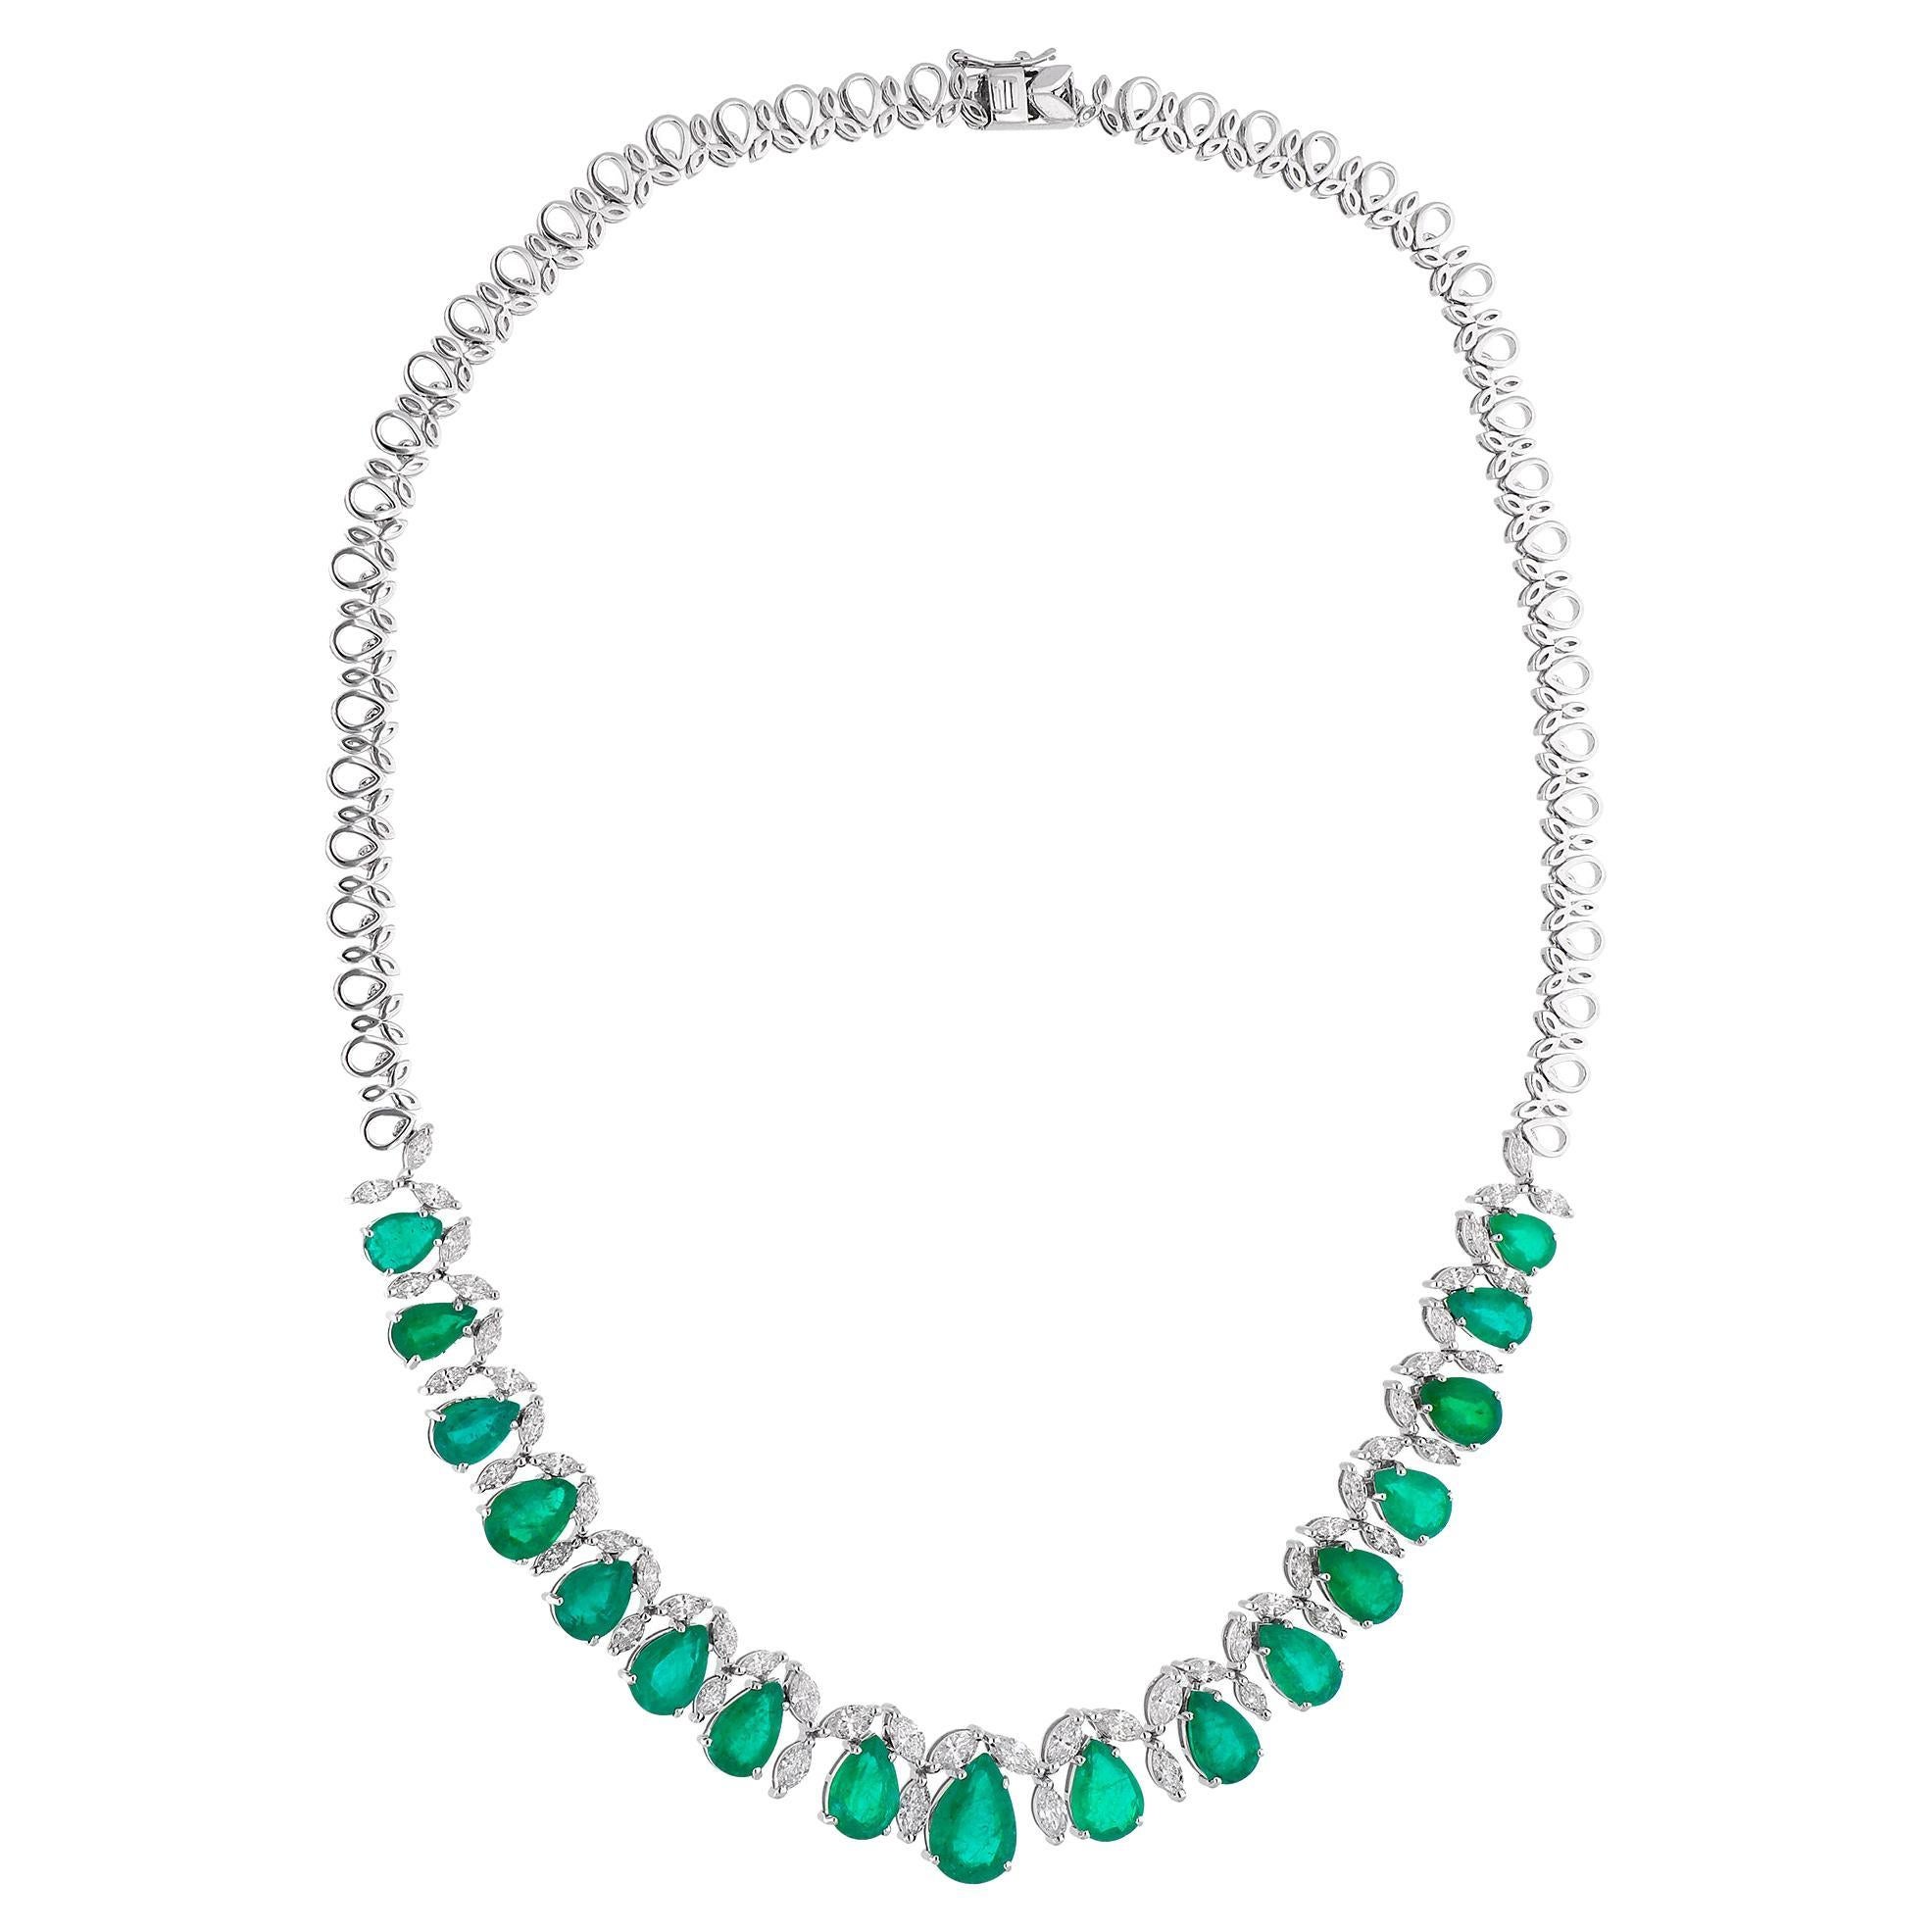 Experience the exquisite elegance of this Pear Natural Emerald Choker Necklace adorned with Marquise Diamonds. Handcrafted with meticulous care, this stunning piece features a pear-shaped natural emerald gemstone gracefully accompanied by shimmering